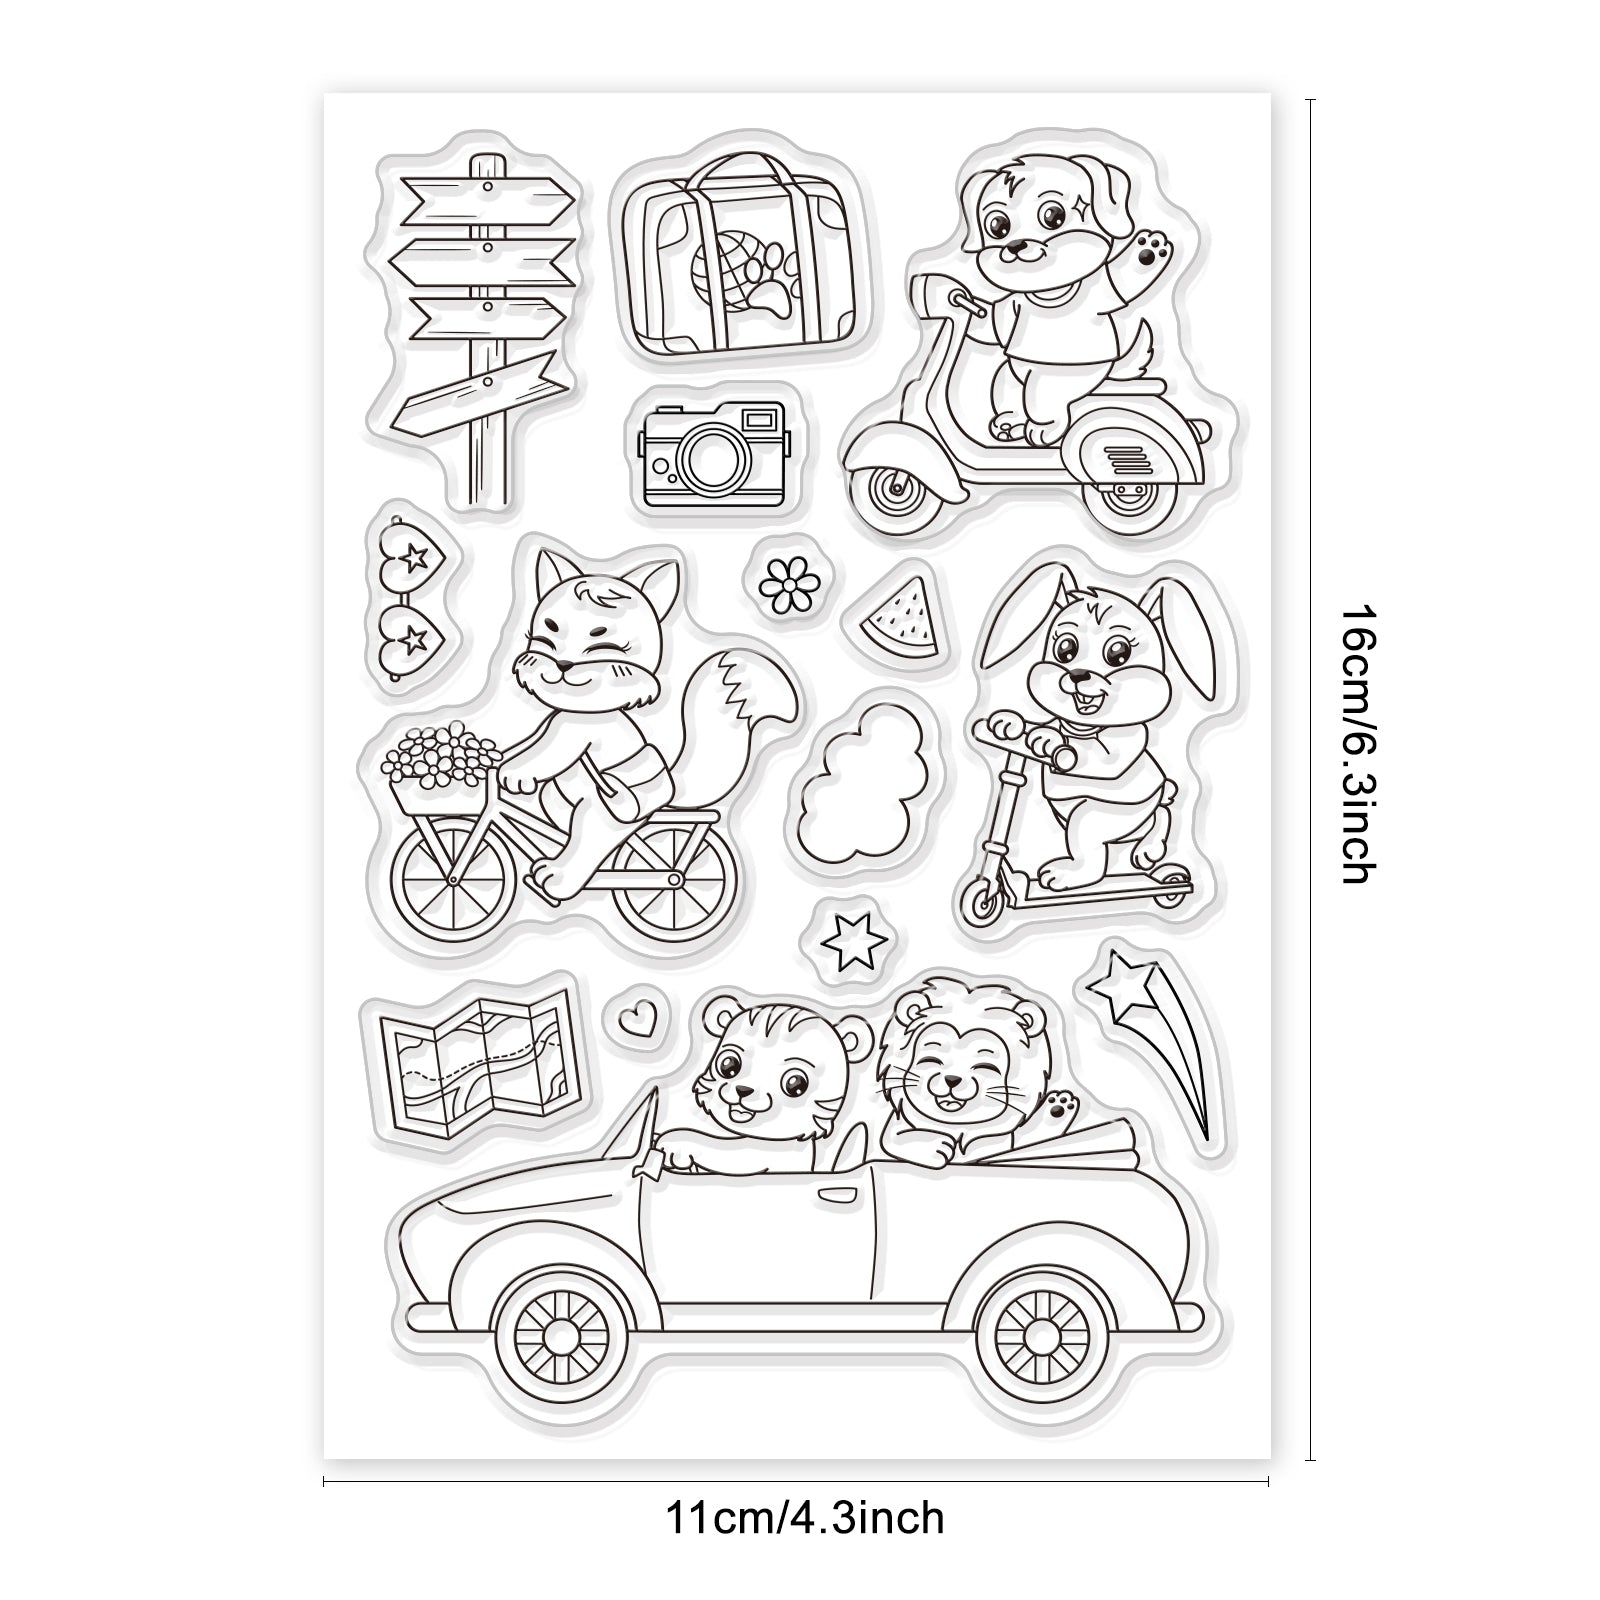 Globleland Travel, Animals, Vehicles, Maps, Suitcases Clear Silicone Stamp Seal for Card Making Decoration and DIY Scrapbooking